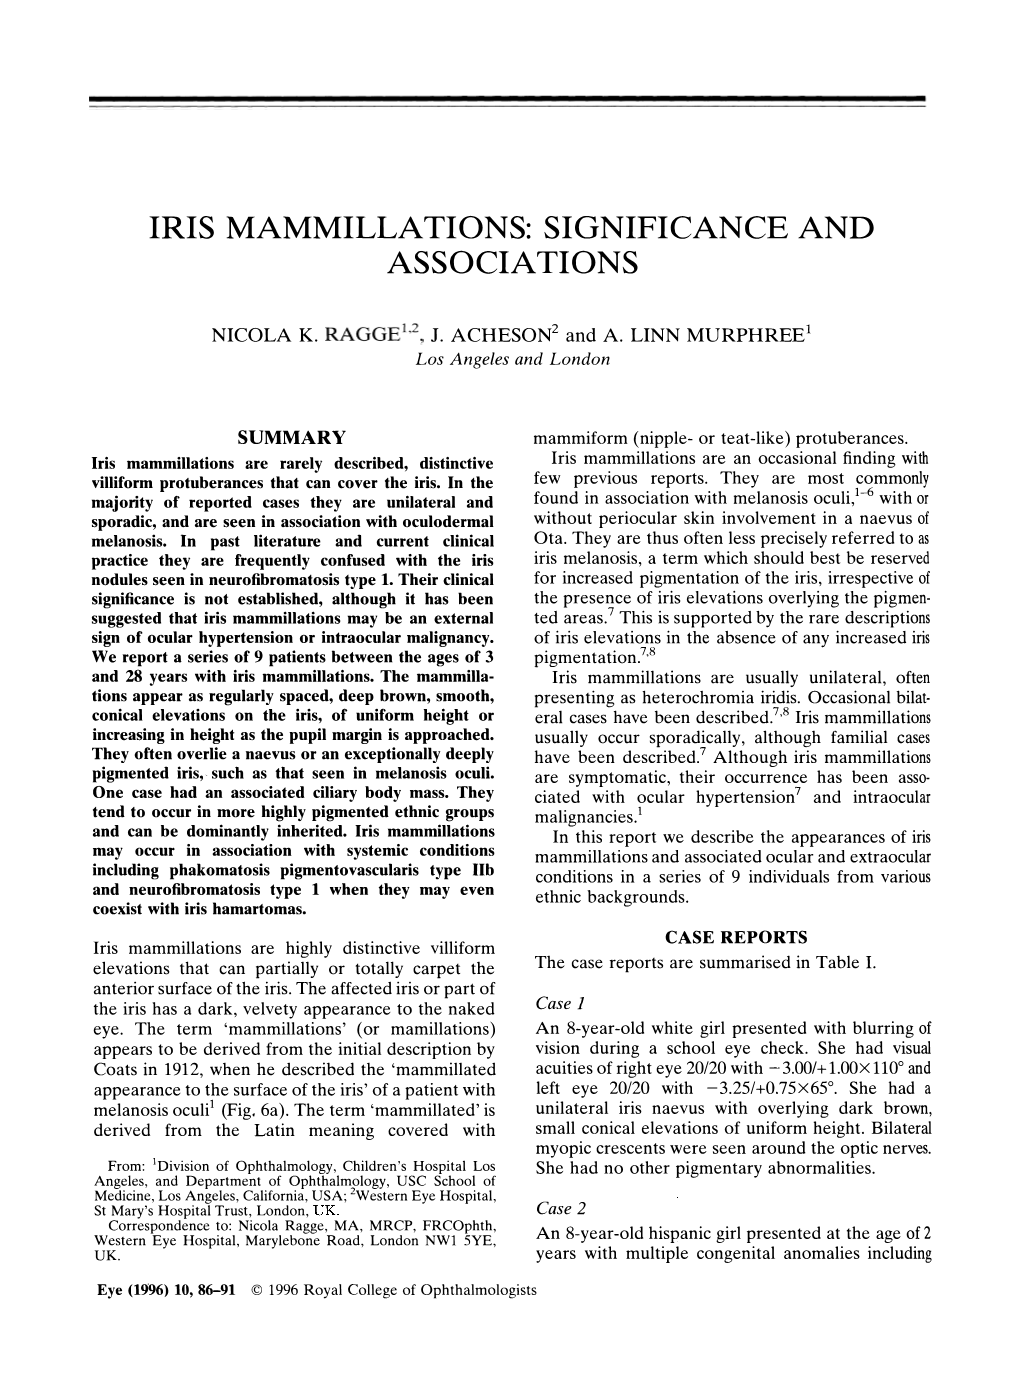 Iris Mammillations: Significance and Associations